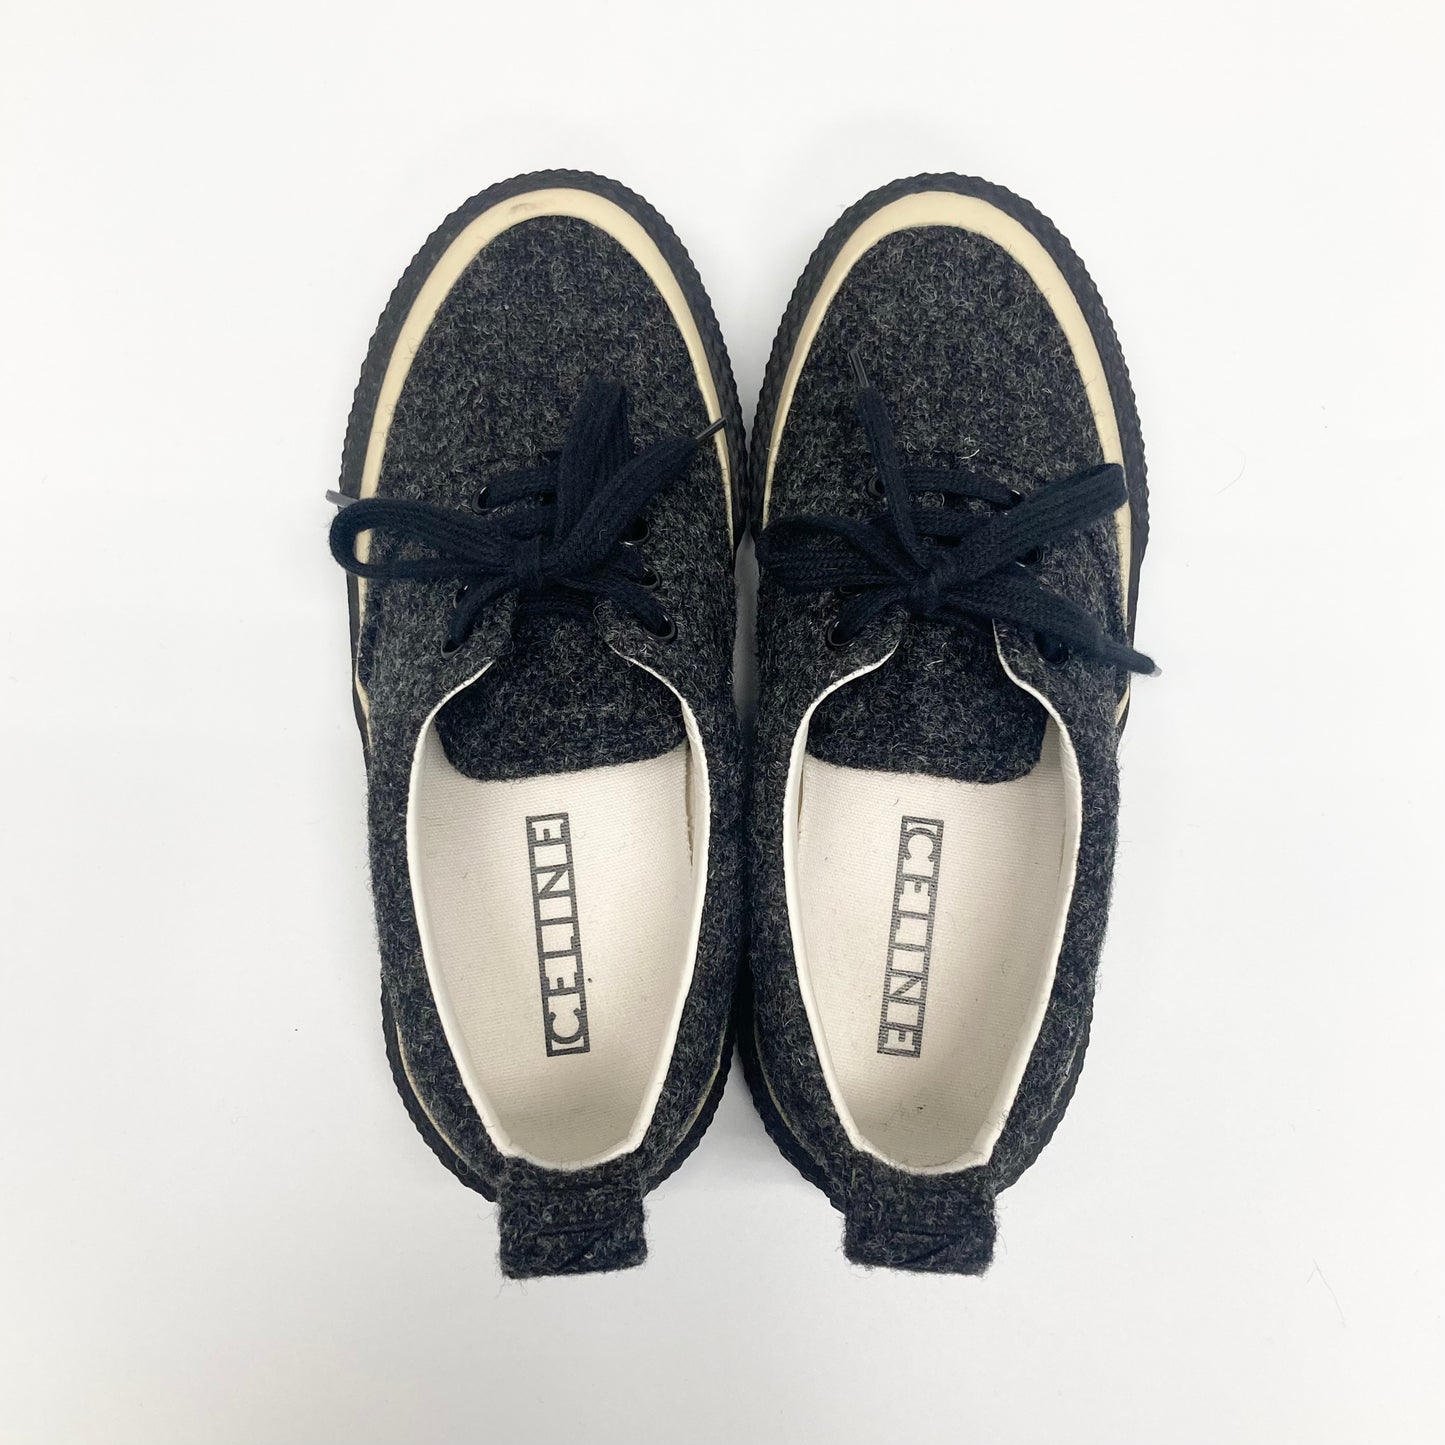 Fall2017 Celine by Phoebe Philo Lace up wool shoes